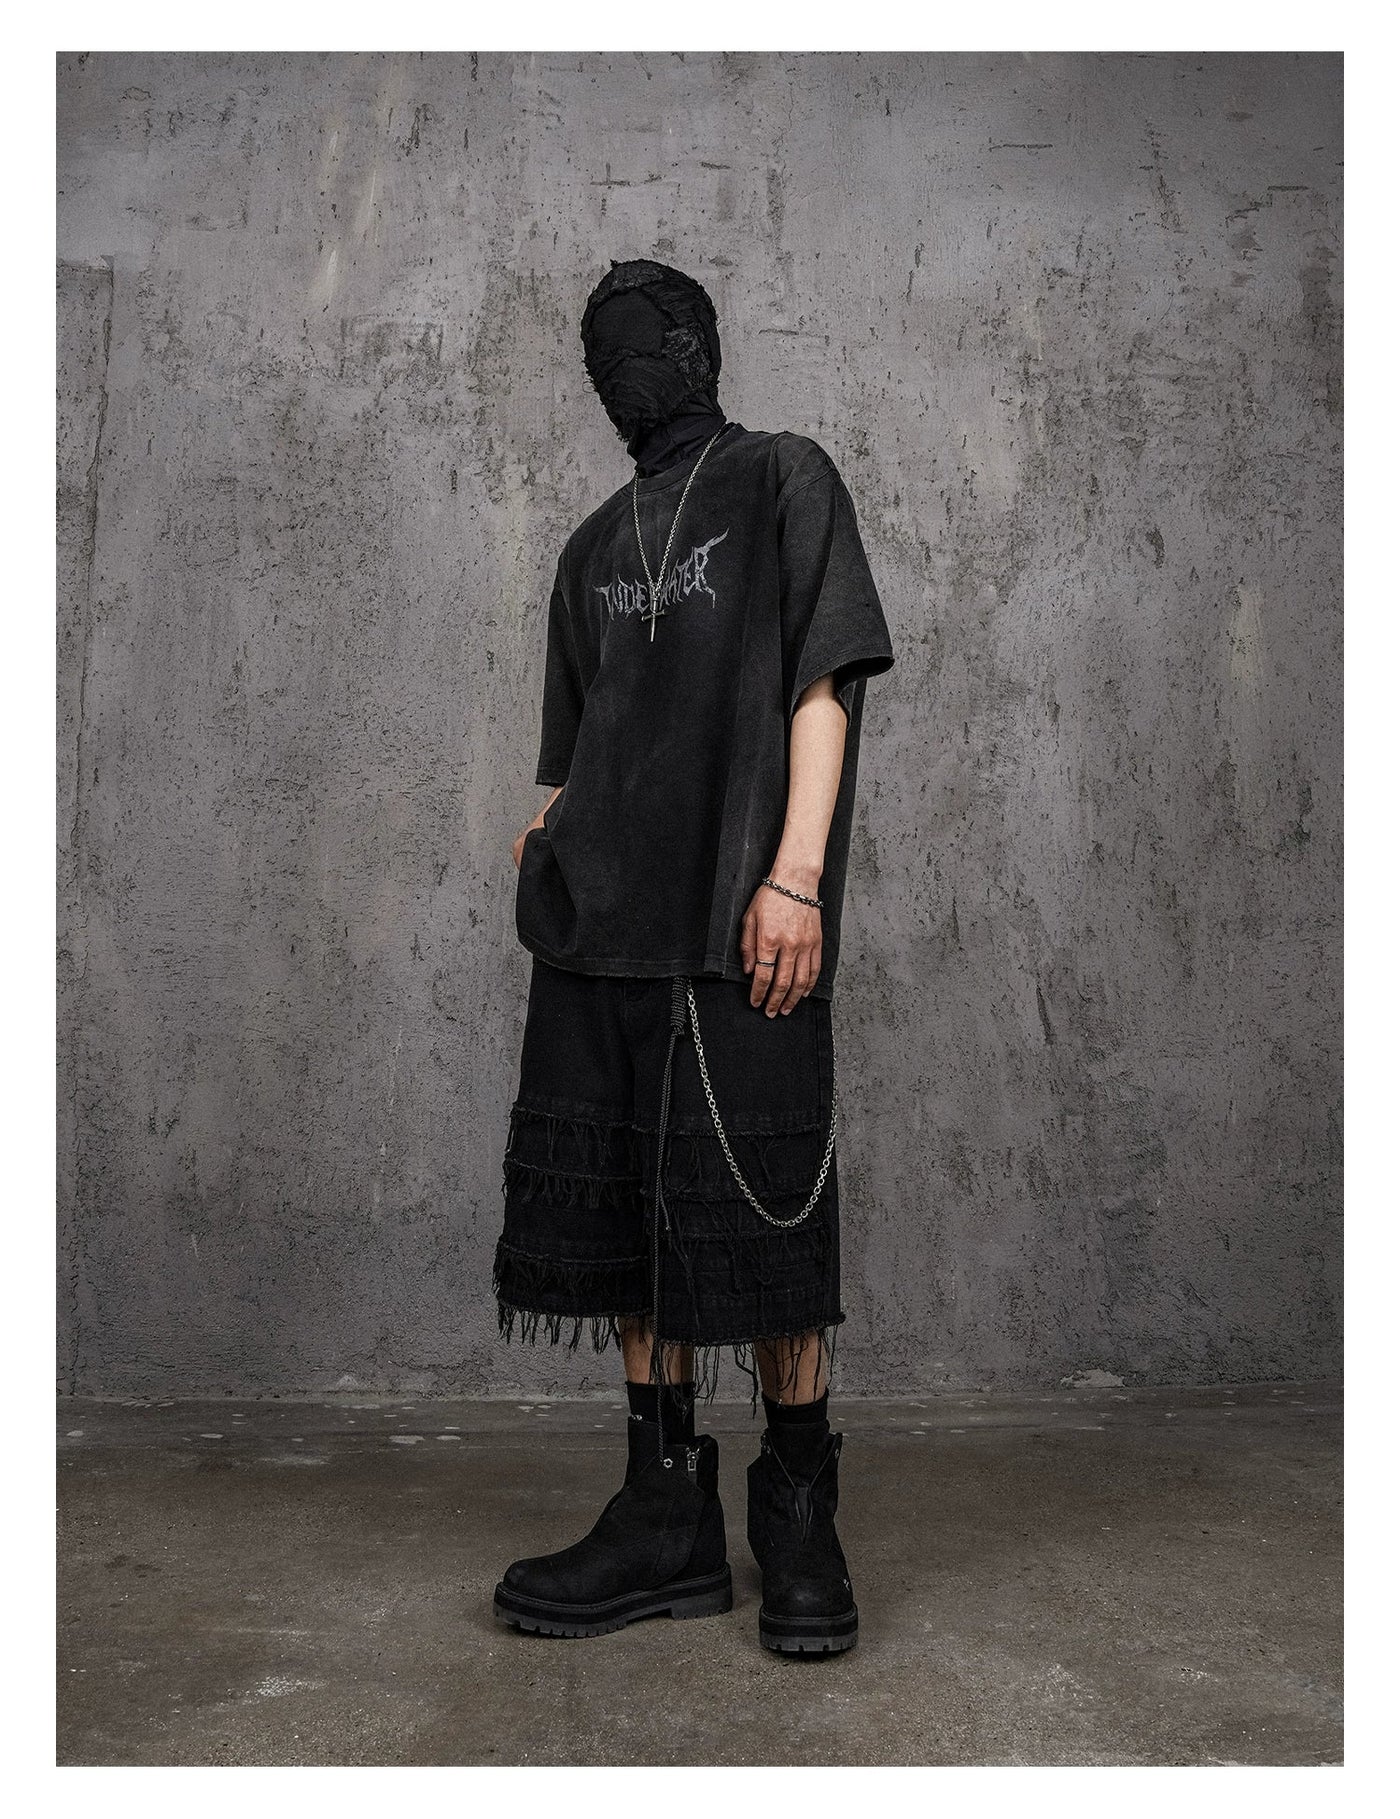 Grunged and Washed T-Shirt Korean Street Fashion T-Shirt By Underwater Shop Online at OH Vault